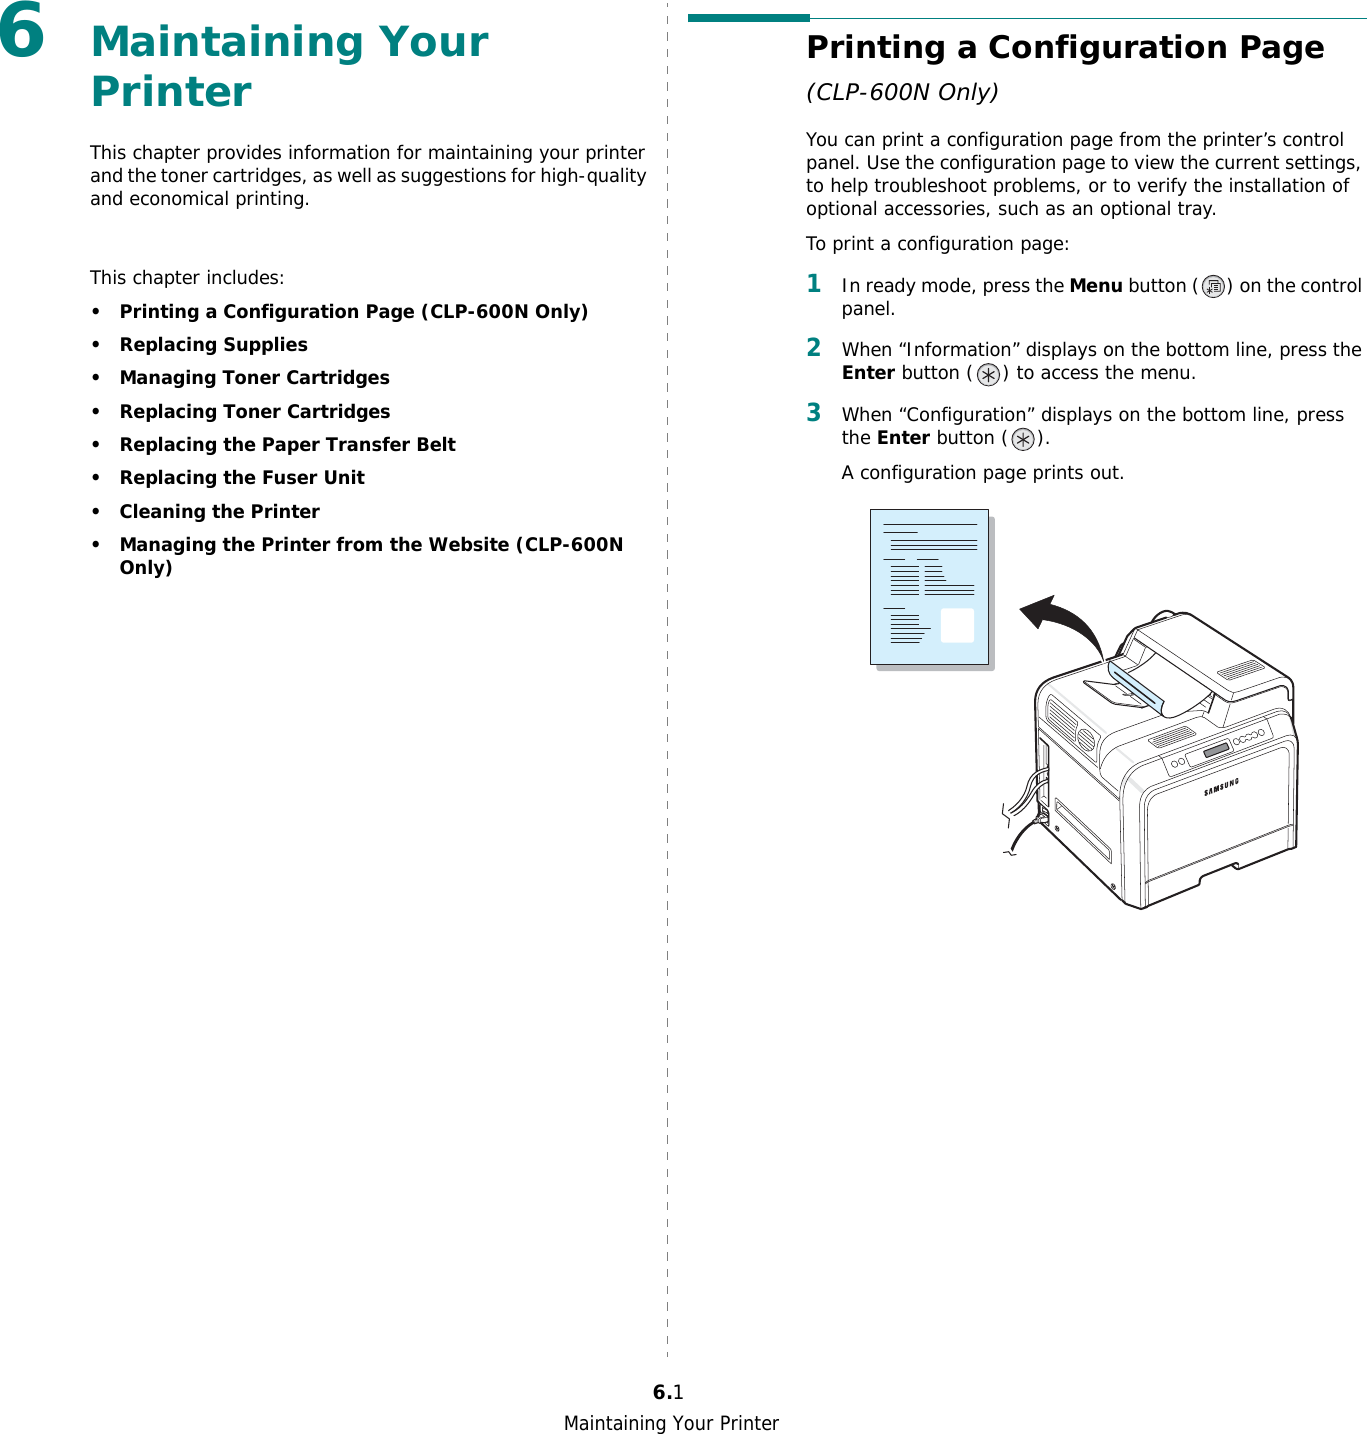 Maintaining Your Printer6.16Maintaining Your Printer This chapter provides information for maintaining your printer and the toner cartridges, as well as suggestions for high-quality and economical printing. This chapter includes:• Printing a Configuration Page (CLP-600N Only)• Replacing Supplies• Managing Toner Cartridges• Replacing Toner Cartridges• Replacing the Paper Transfer Belt• Replacing the Fuser Unit• Cleaning the Printer• Managing the Printer from the Website (CLP-600N Only)Printing a Configuration Page (CLP-600N Only)You can print a configuration page from the printer’s control panel. Use the configuration page to view the current settings, to help troubleshoot problems, or to verify the installation of optional accessories, such as an optional tray. To print a configuration page:1In ready mode, press the Menu button ( ) on the control panel.2When “Information” displays on the bottom line, press the Enter button ( ) to access the menu.3When “Configuration” displays on the bottom line, press the Enter button ( ).A configuration page prints out. 